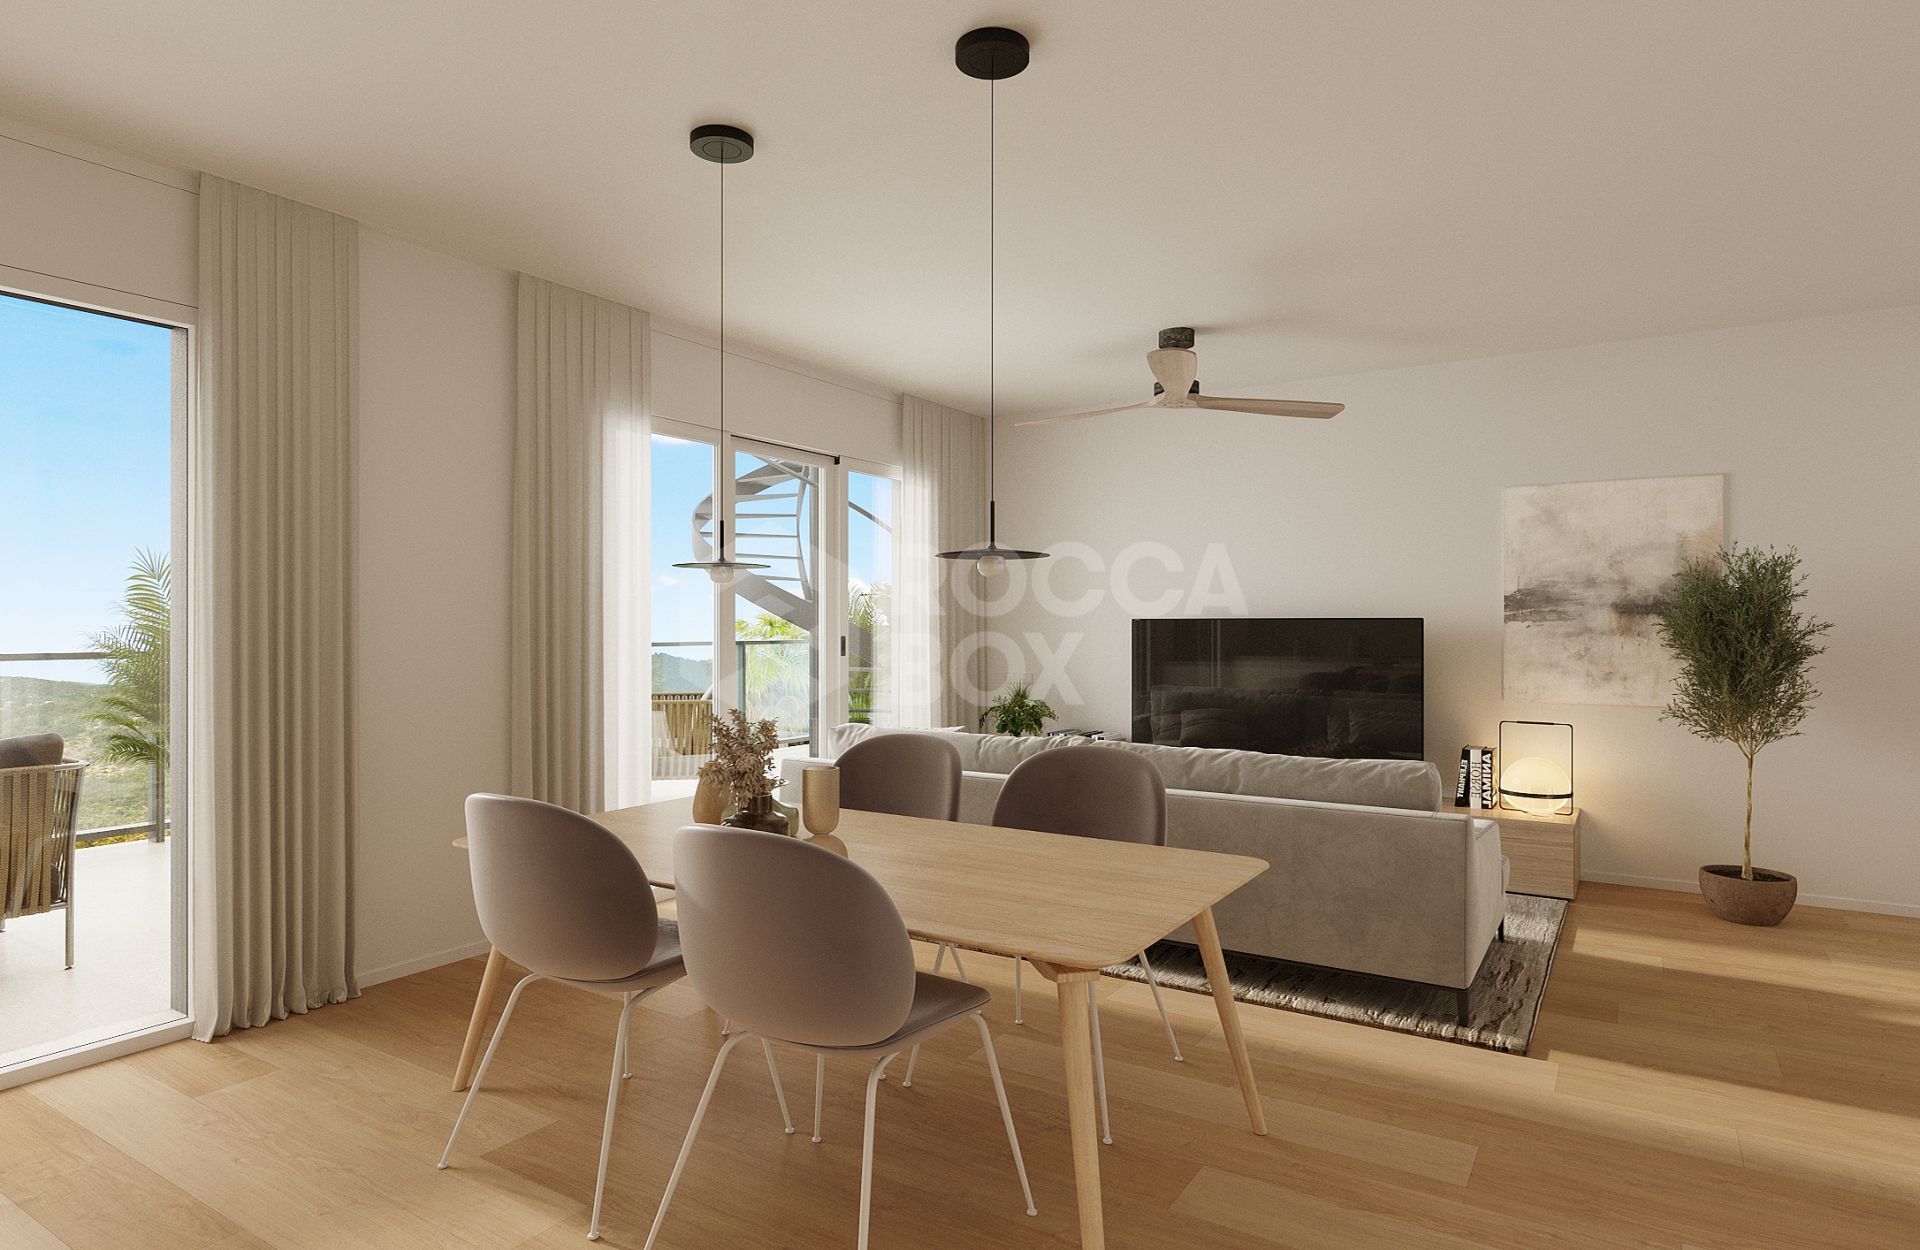 Breeze, modern apartments and townhouses on the sunny Costa Blanca.